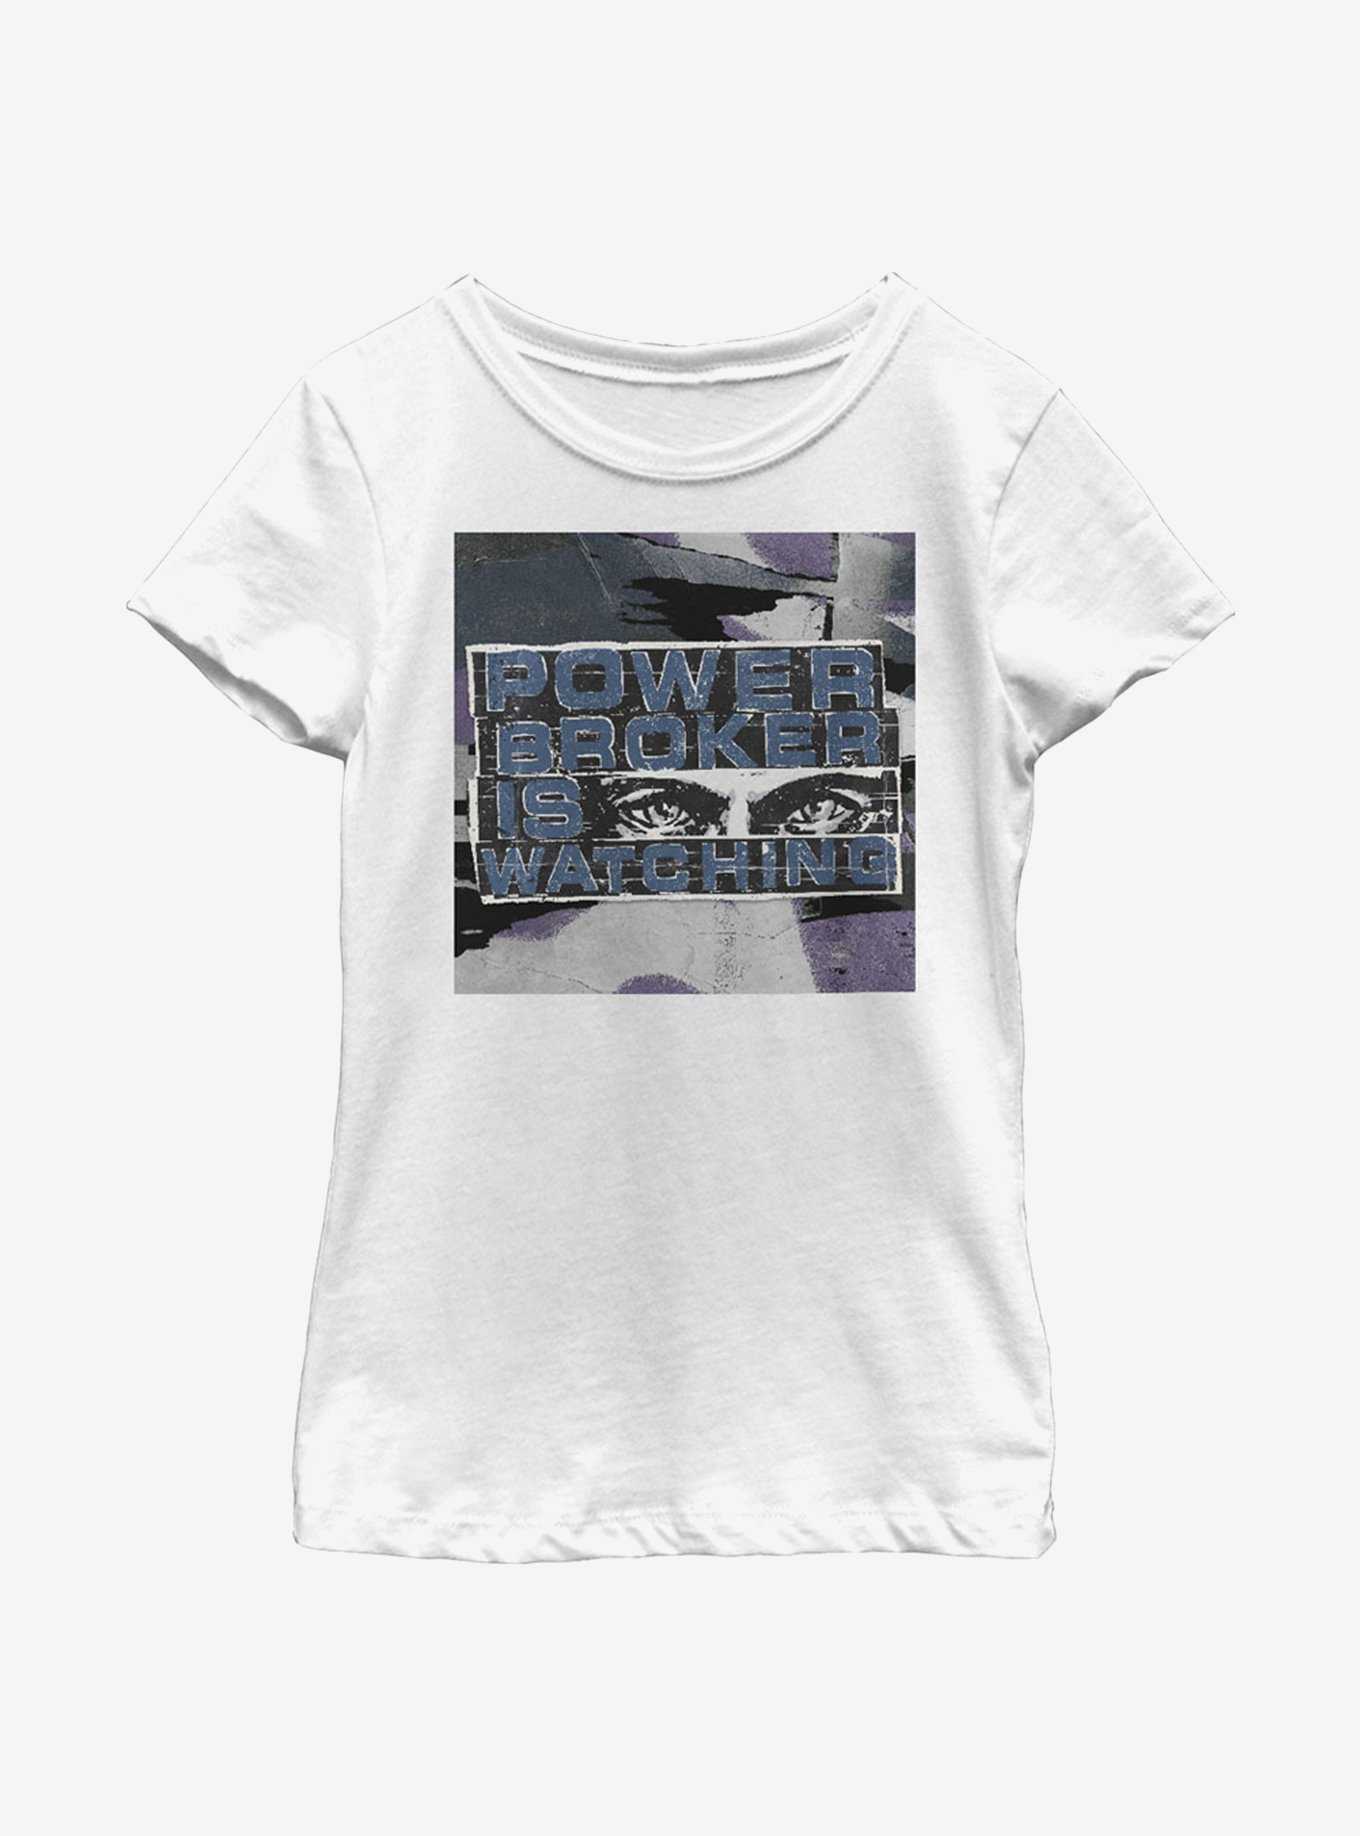 Marvel The Falcon And The Winter Soldier Power Broker Is Watching Youth Girls T-Shirt, , hi-res